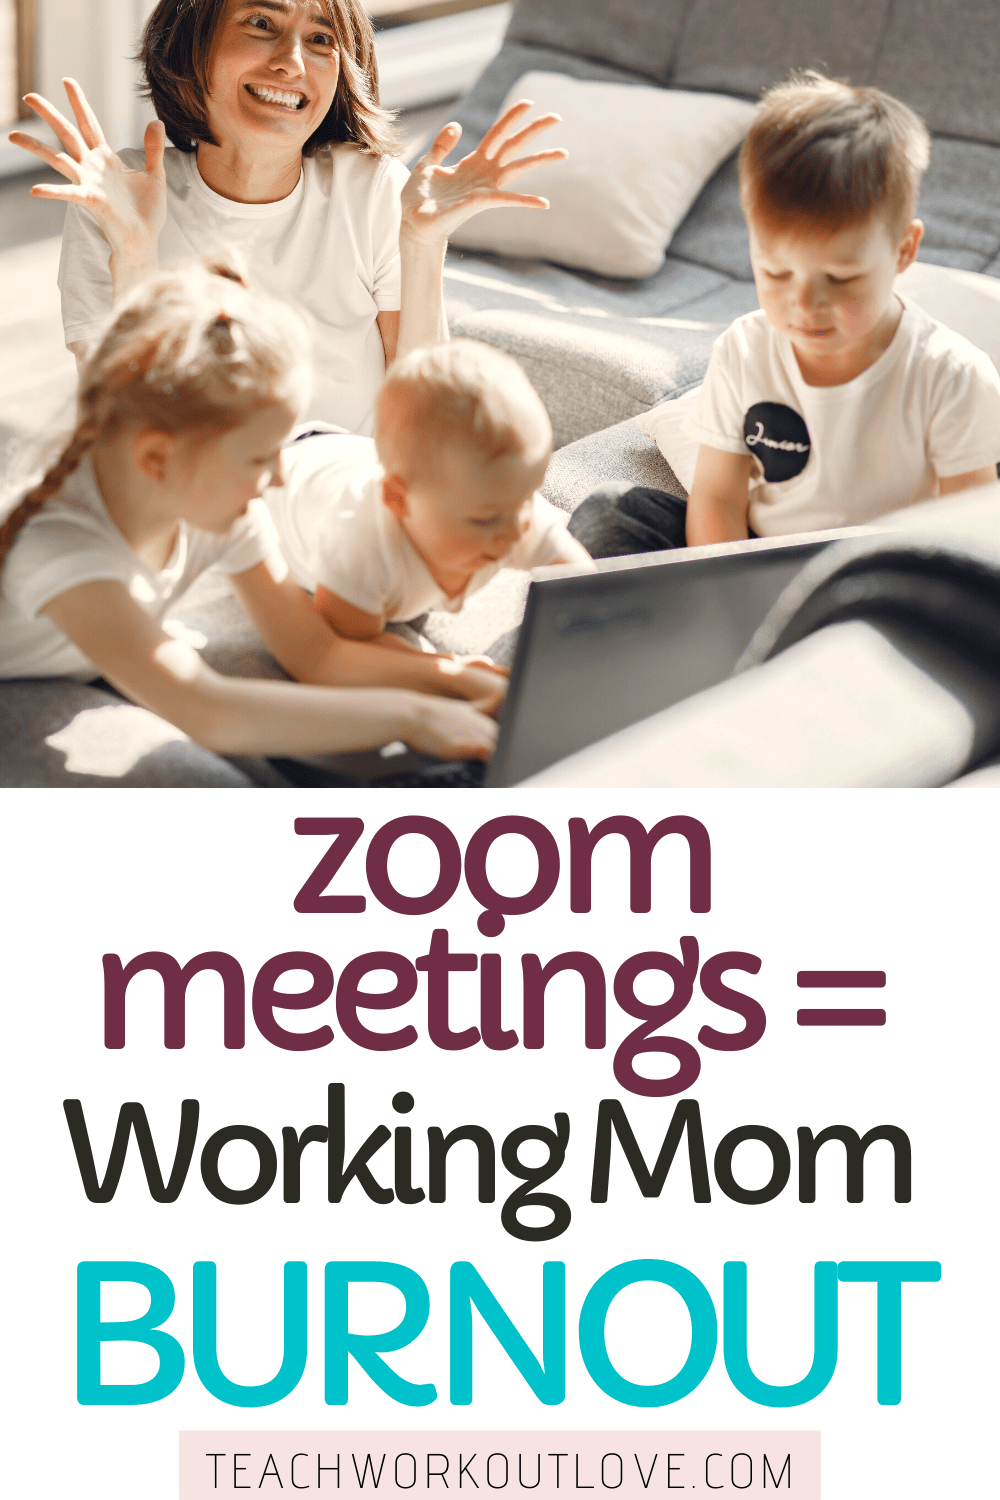 Zoom Meetings are a new working mom nightmare! Let’s dig deeper and look at the bigger picture of why and how working moms are dealing with it. 